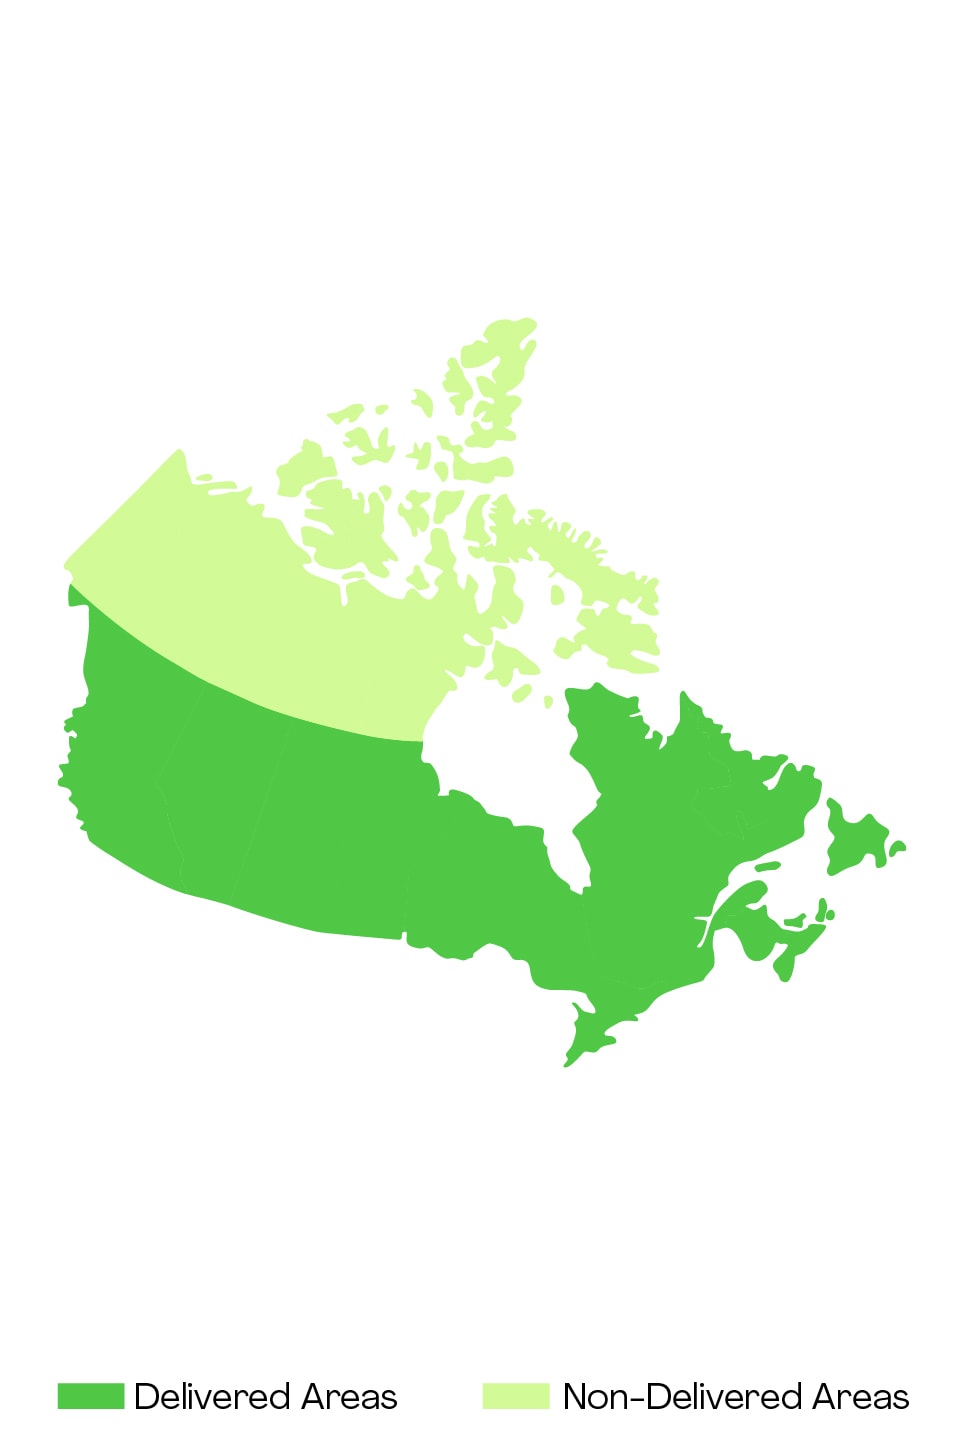 <h2>Recipes box: delivery areas in Canada</h2>